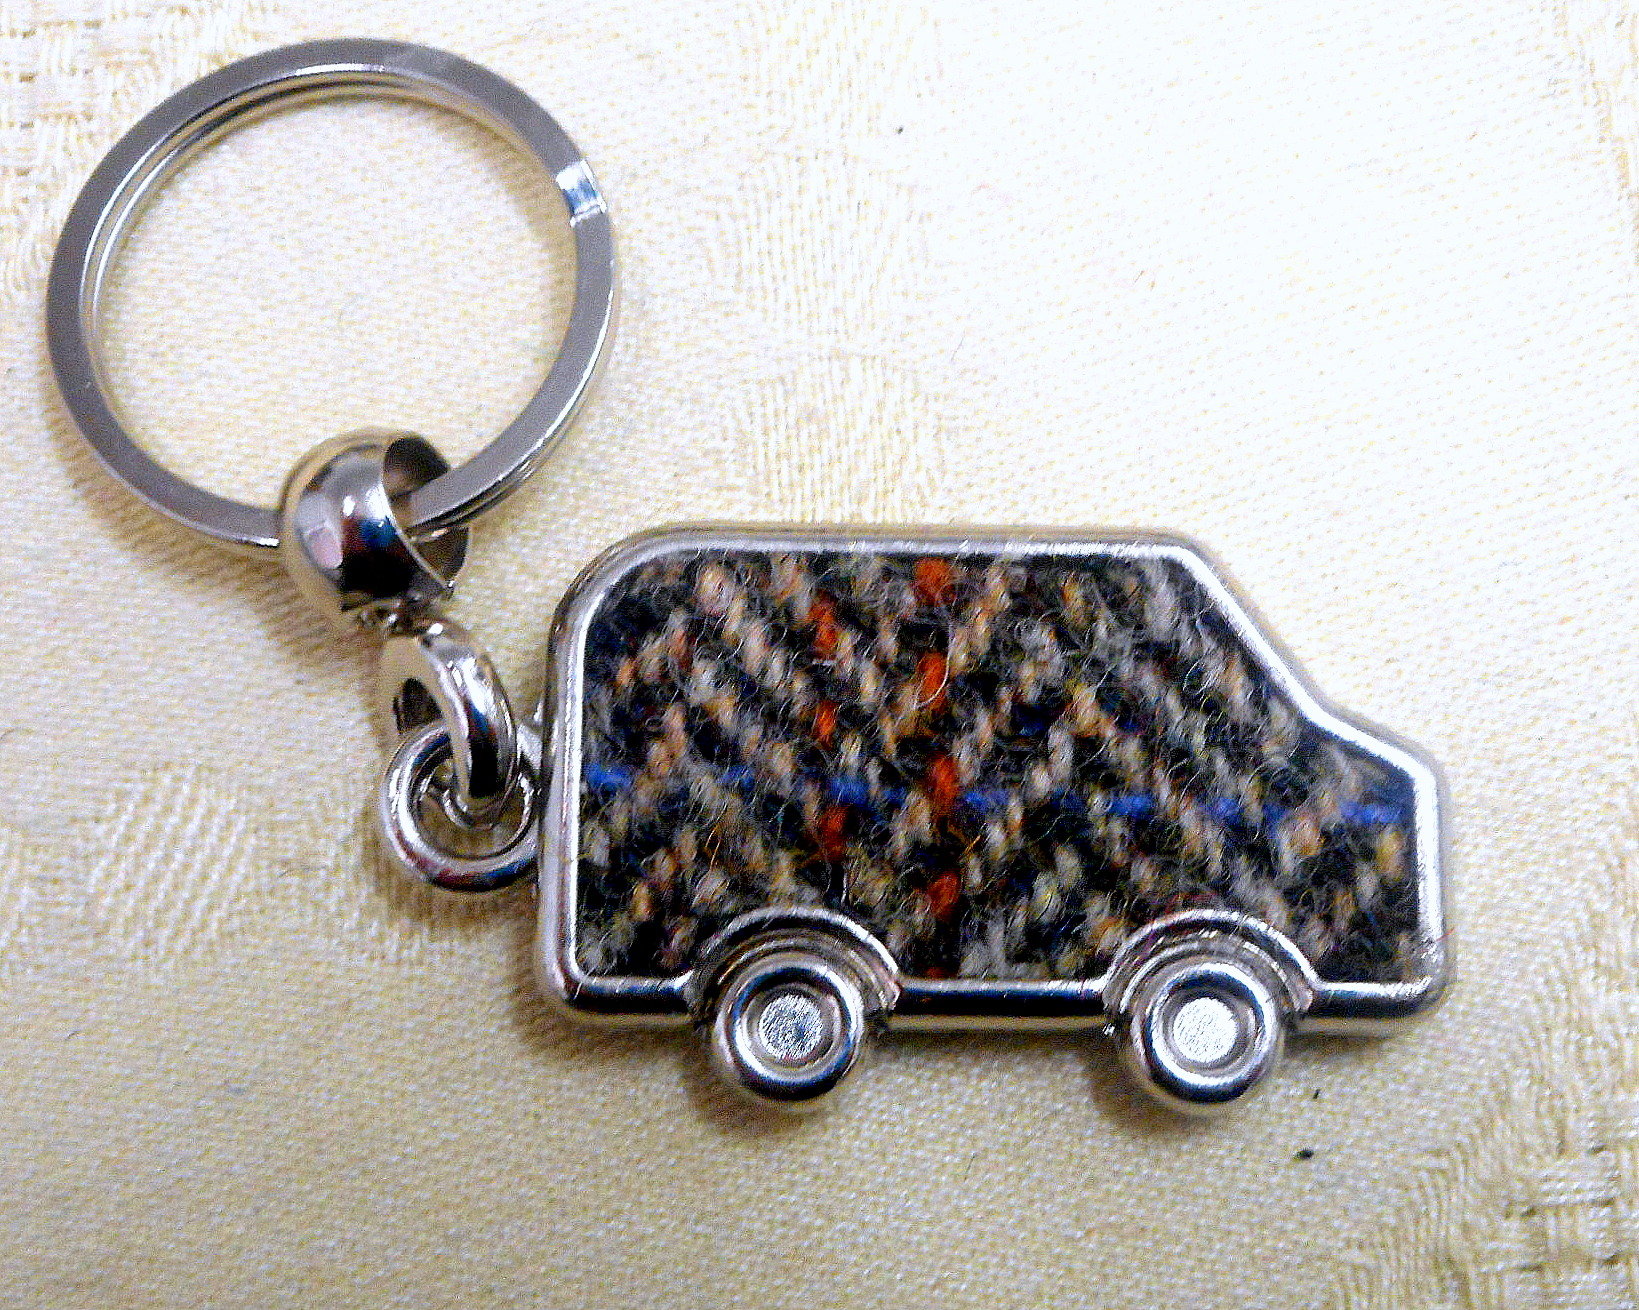 Harris Tweed key fob, keyring Car van or SUV  ideal small gift or Wedding favour  made in Scotland